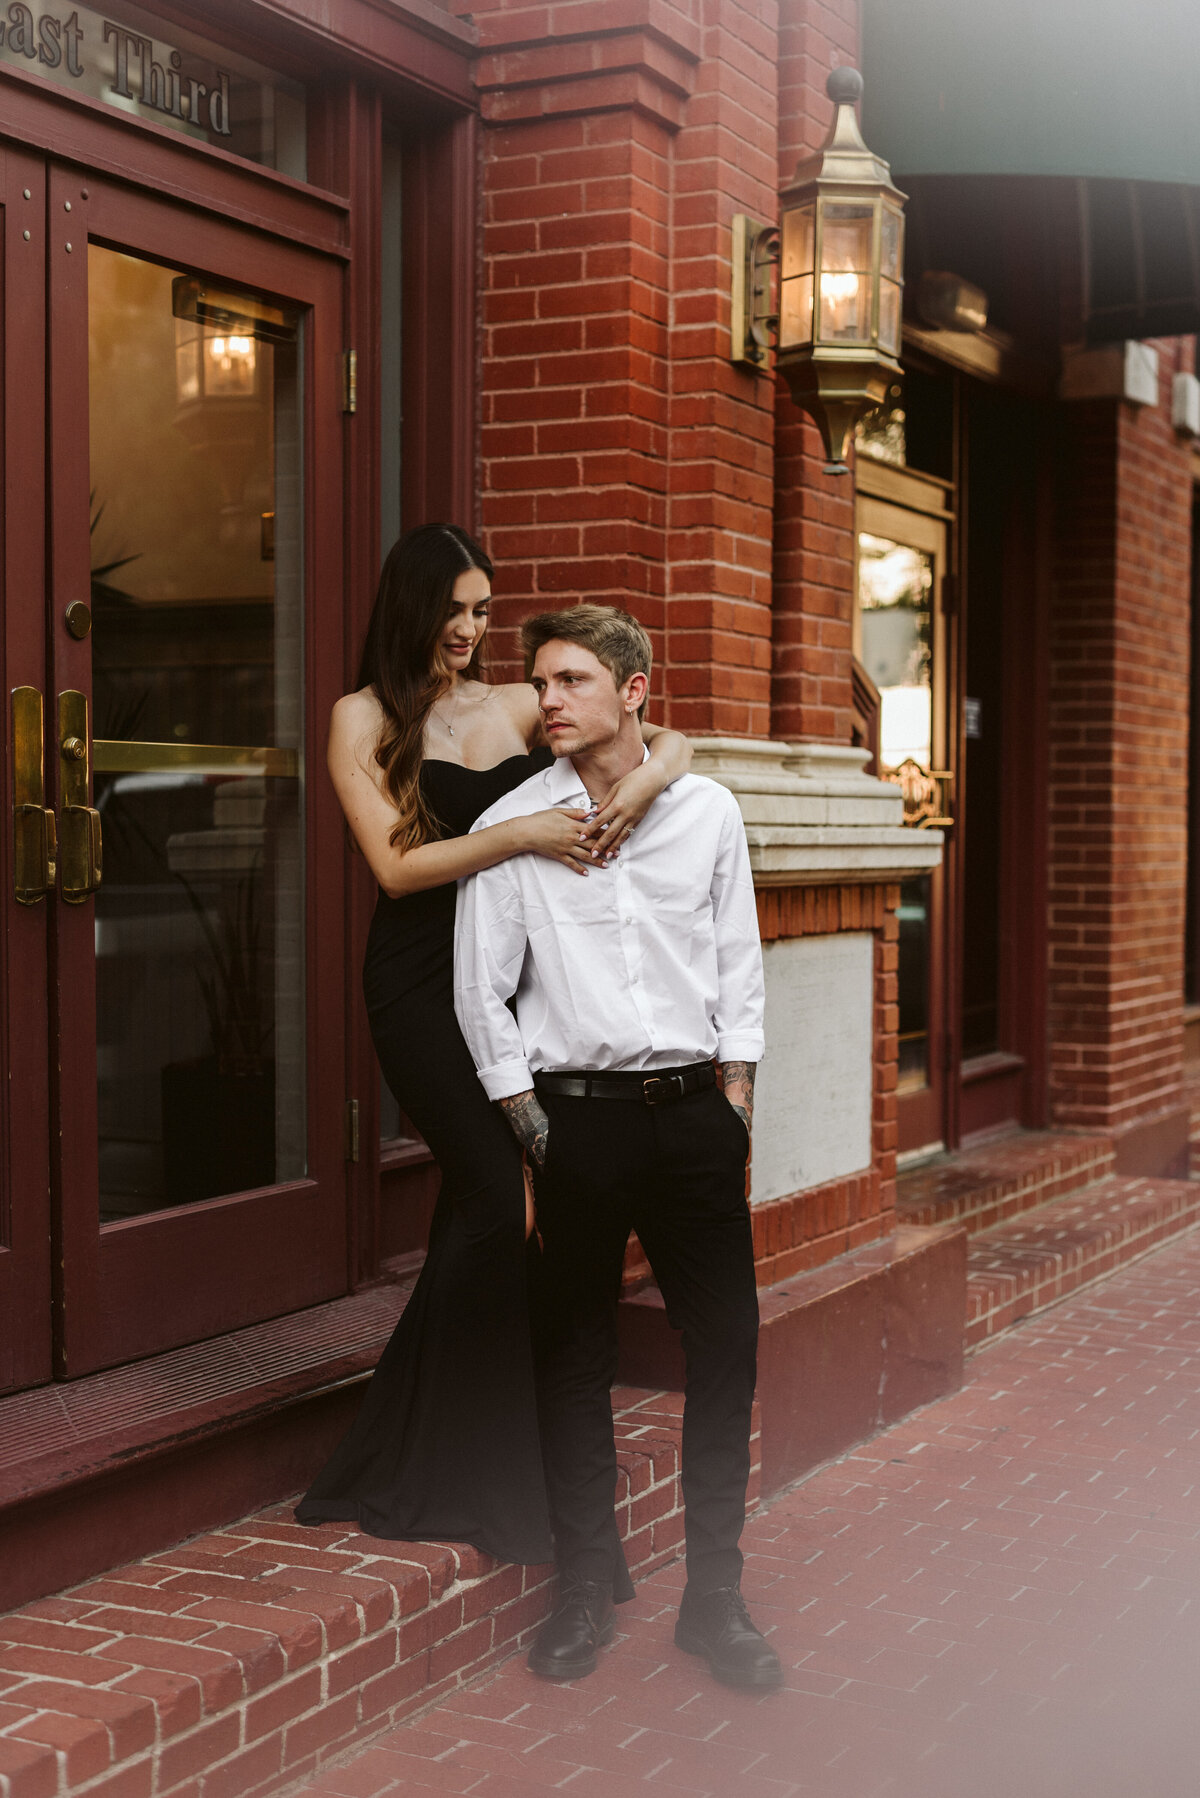 Natalie-and-Codi-engagement-session-at-sundance-sqaure-fort-worth-by-bruna-kitchen-photography-4